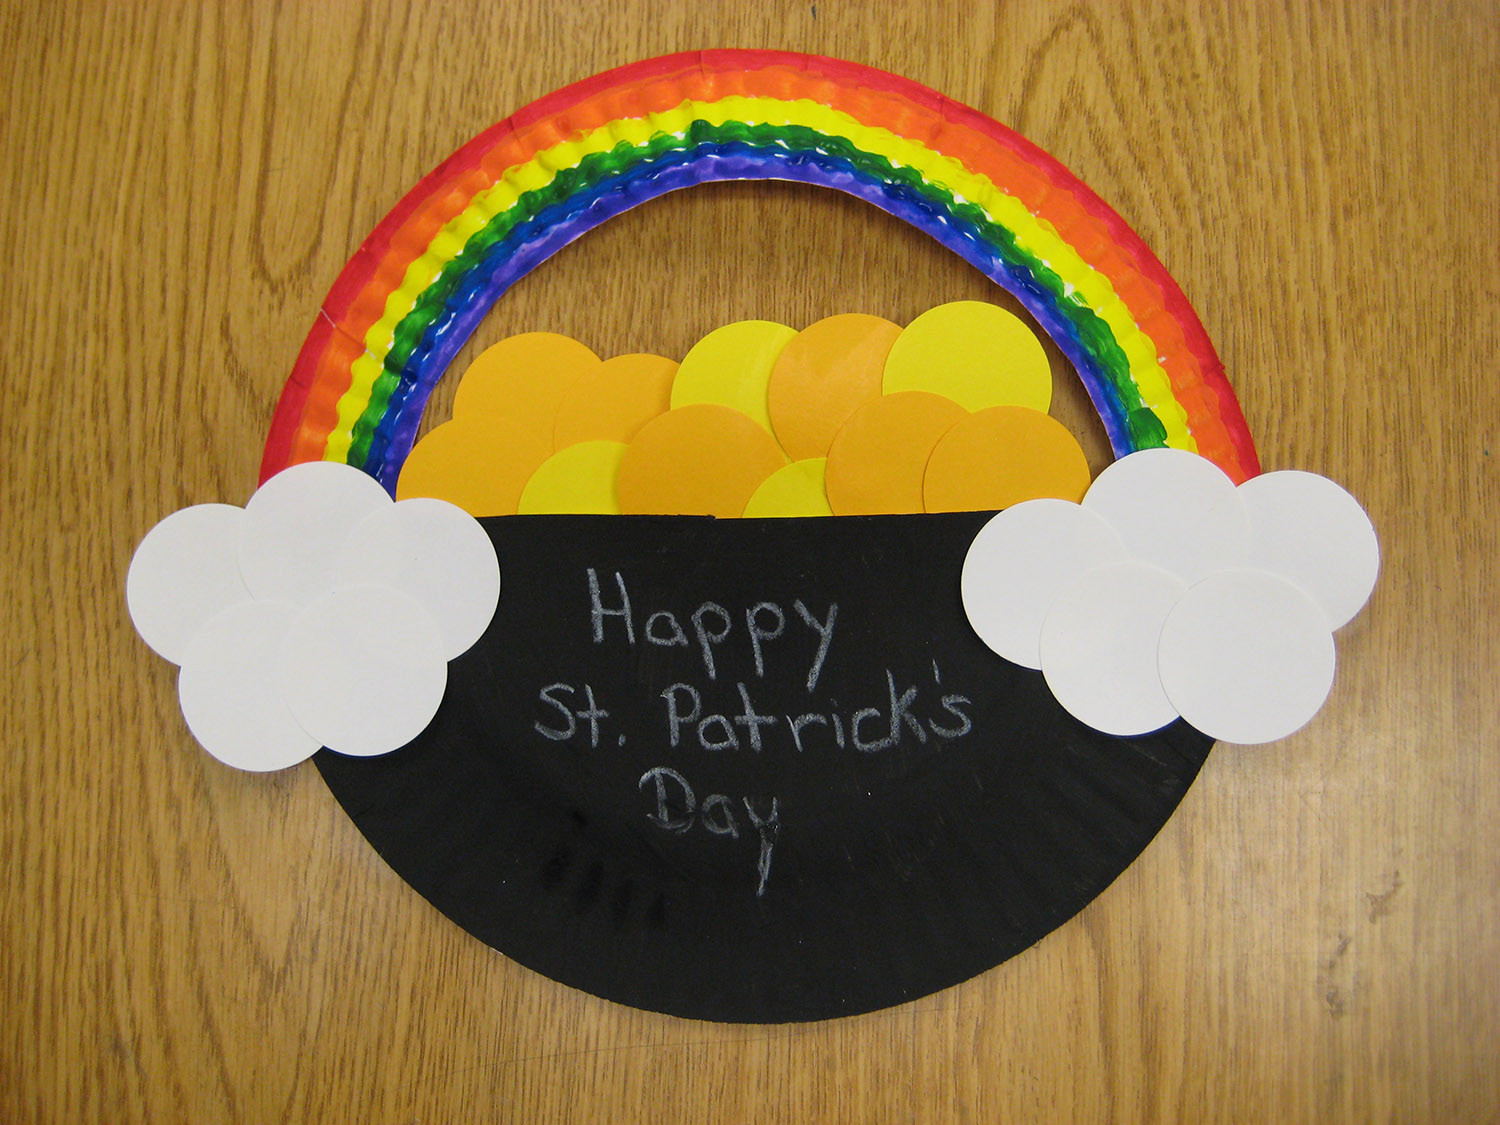 St Patrick Day Crafts For Kindergarten
 Pot o Gold Craft Project